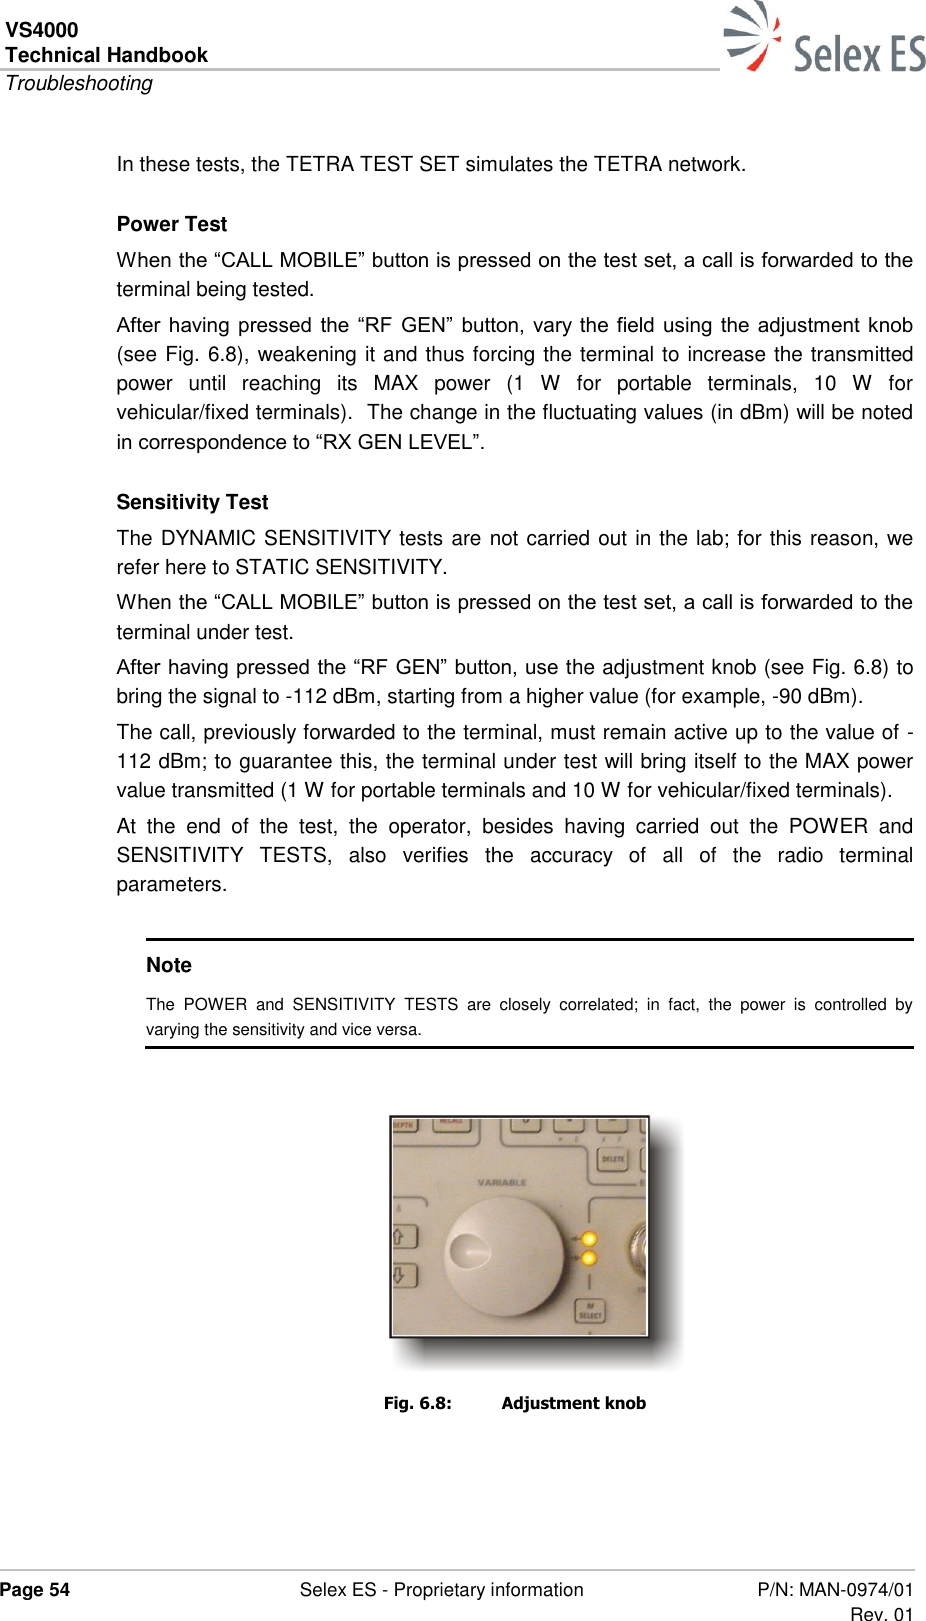 VS4000 Technical Handbook  Troubleshooting  Page 54  Selex ES - Proprietary information P/N: MAN-0974/01 Rev. 01  In these tests, the TETRA TEST SET simulates the TETRA network. Power Test When the “CALL MOBILE” button is pressed on the test set, a call is forwarded to the terminal being tested. After having pressed the “RF  GEN”  button, vary the field using the adjustment knob (see Fig. 6.8), weakening it and thus forcing the terminal to increase the transmitted power  until  reaching  its  MAX  power  (1  W  for  portable  terminals,  10  W  for vehicular/fixed terminals).  The change in the fluctuating values (in dBm) will be noted in correspondence to “RX GEN LEVEL”. Sensitivity Test The DYNAMIC SENSITIVITY tests are not carried out in the lab; for this reason, we refer here to STATIC SENSITIVITY. When the “CALL MOBILE” button is pressed on the test set, a call is forwarded to the terminal under test. After having pressed the “RF GEN” button, use the adjustment knob (see Fig. 6.8) to bring the signal to -112 dBm, starting from a higher value (for example, -90 dBm). The call, previously forwarded to the terminal, must remain active up to the value of -112 dBm; to guarantee this, the terminal under test will bring itself to the MAX power value transmitted (1 W for portable terminals and 10 W for vehicular/fixed terminals). At  the  end  of  the  test,  the  operator,  besides  having  carried  out  the  POWER  and SENSITIVITY  TESTS,  also  verifies  the  accuracy  of  all  of  the  radio  terminal parameters.  Note The  POWER  and  SENSITIVITY  TESTS  are  closely  correlated;  in  fact,  the  power  is  controlled  by varying the sensitivity and vice versa.  Fig. 6.8:  Adjustment knob 